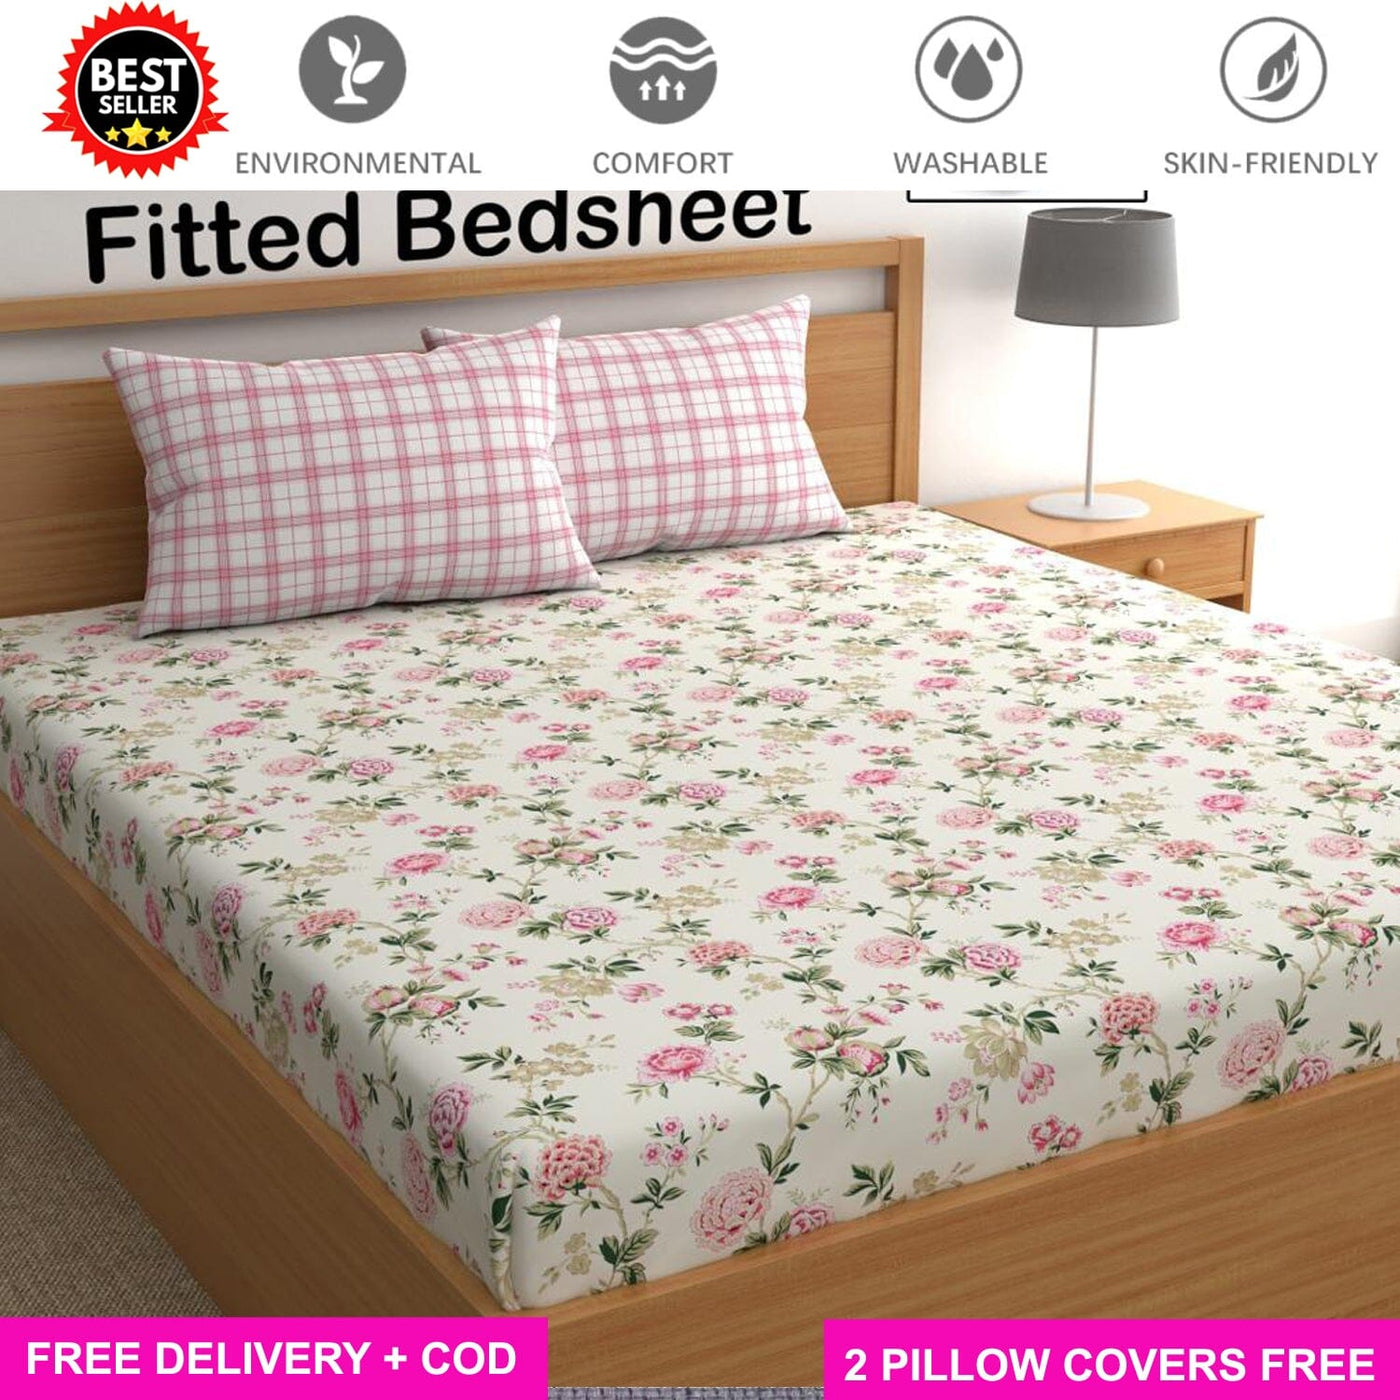 Pink Rose Contrast Full Elastic Fitted Bedsheet with 2 Pillow Covers - King Size Bed Sheets Great Happy IN 